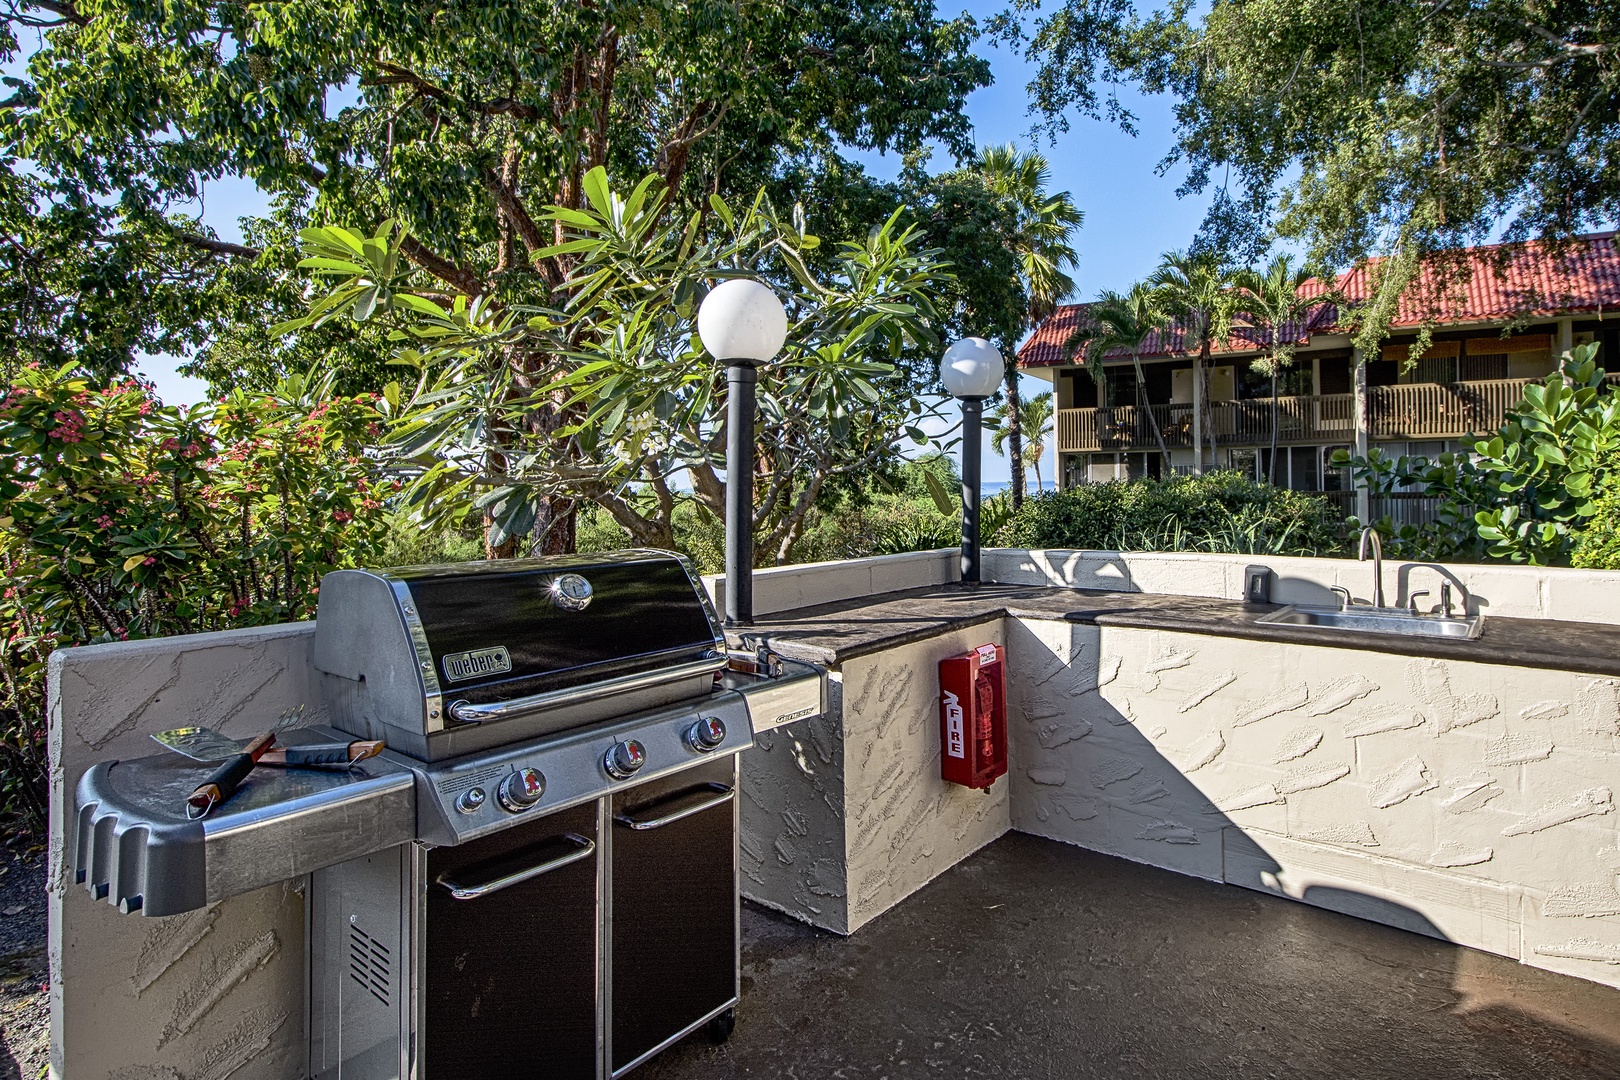 Kailua-Kona Vacation Rentals, Kona Mansions D231 - BBQ at the complex if you feel like